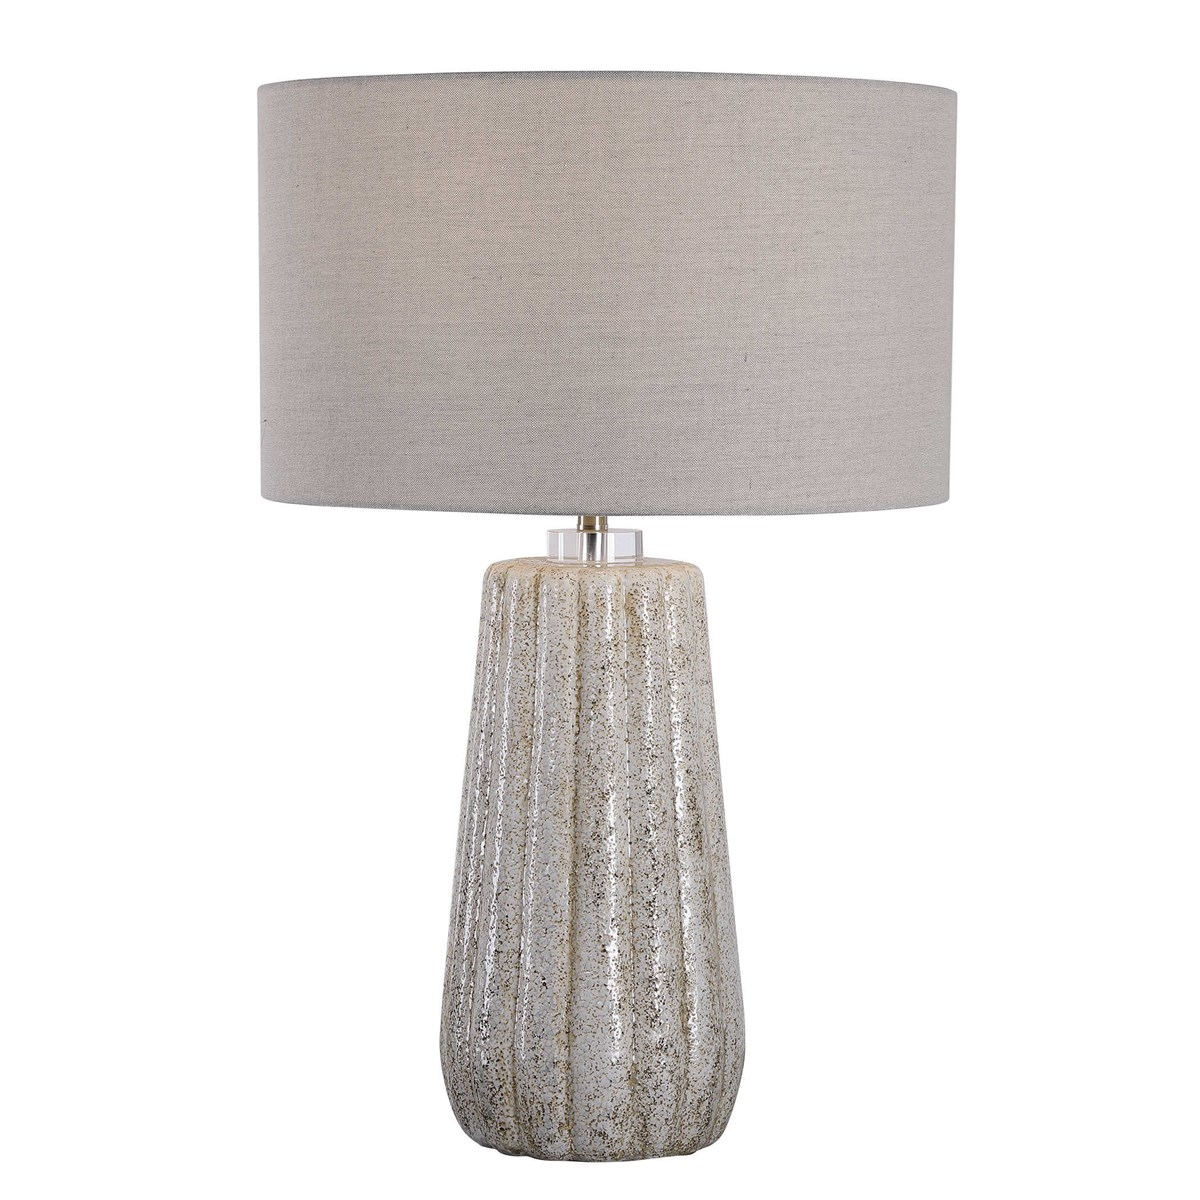 PIKES TABLE LAMP - Image 0